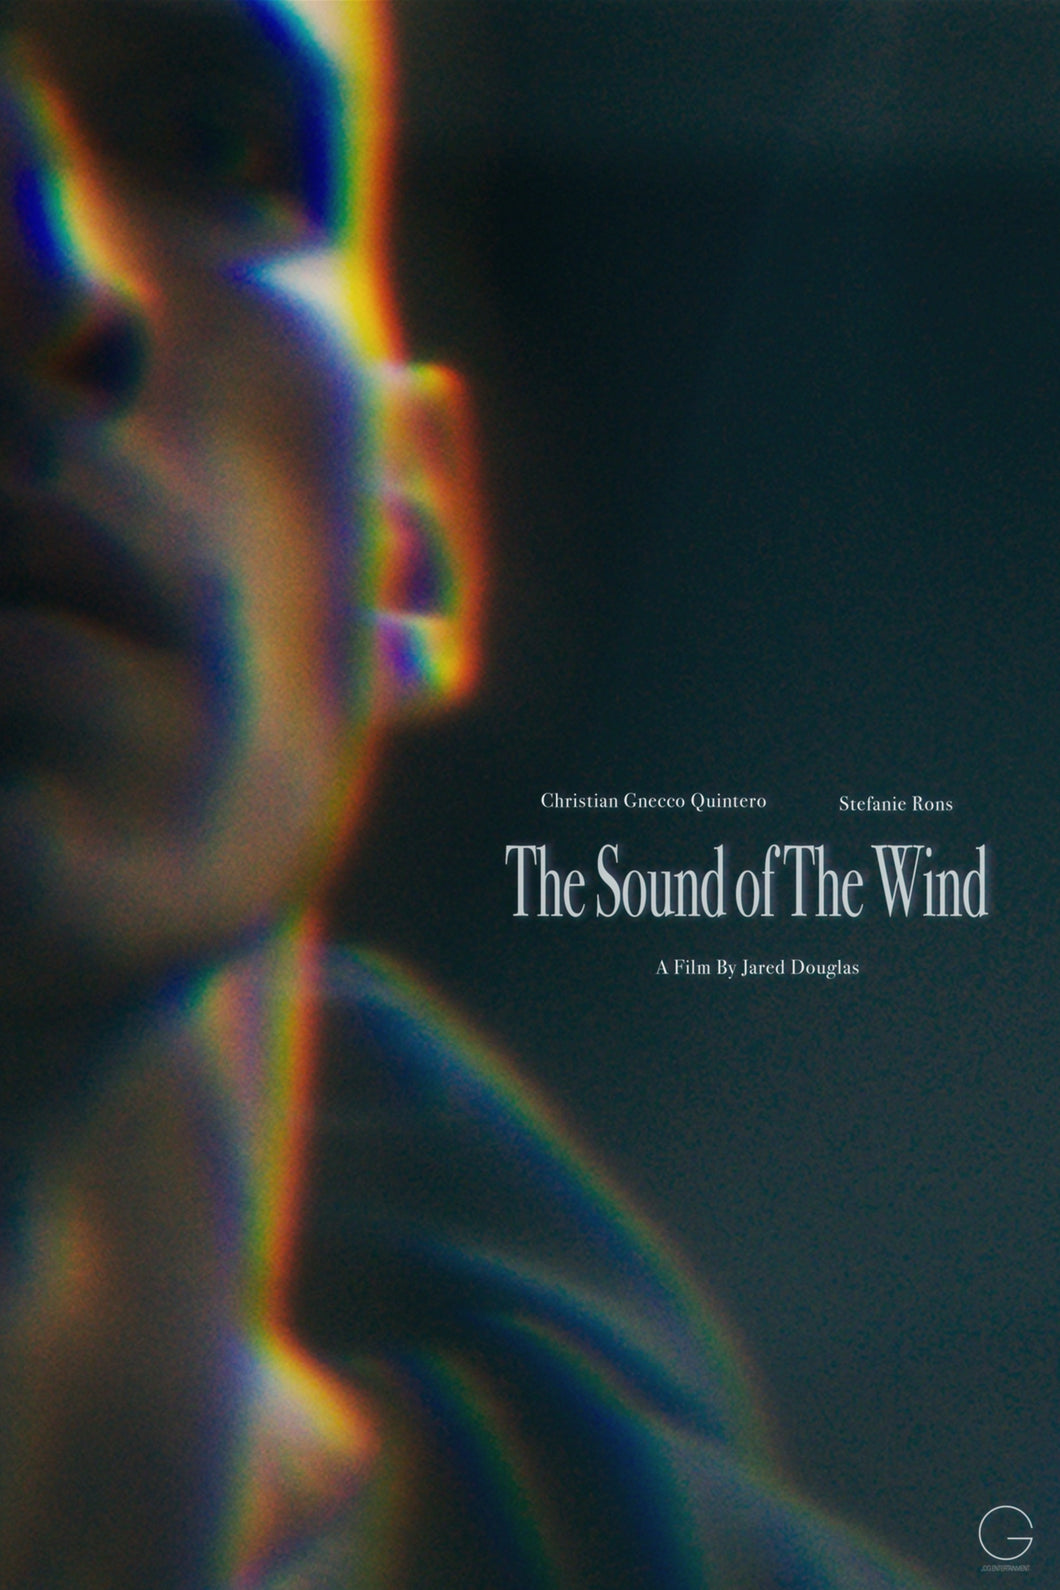 The Sound of The Wind - Theatrical Poster